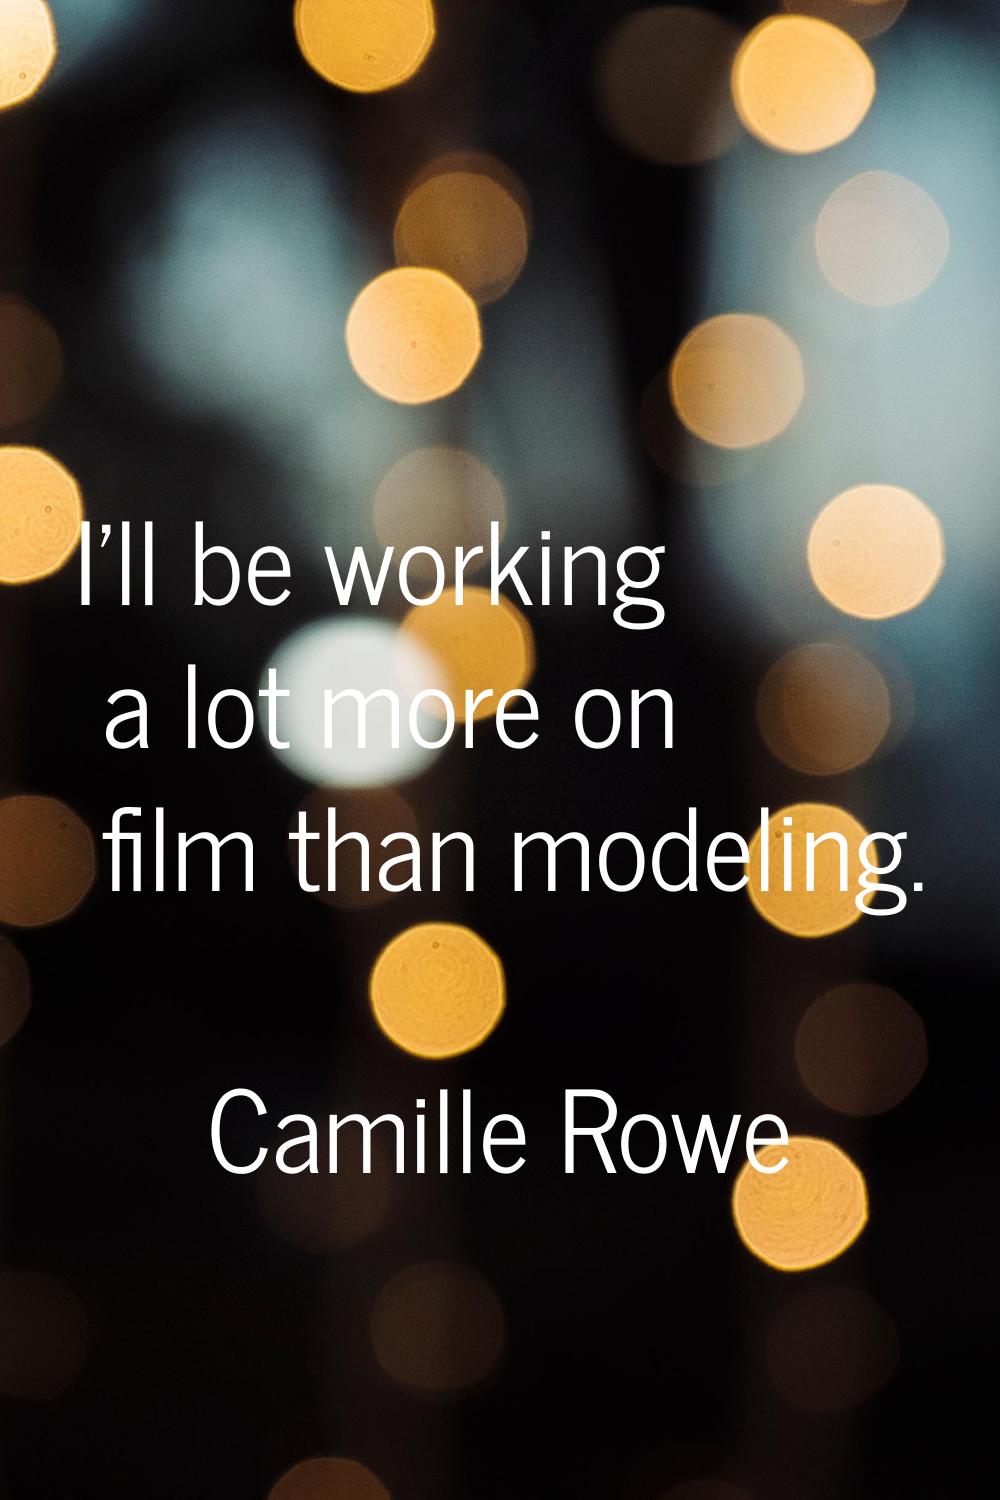 I'll be working a lot more on film than modeling.